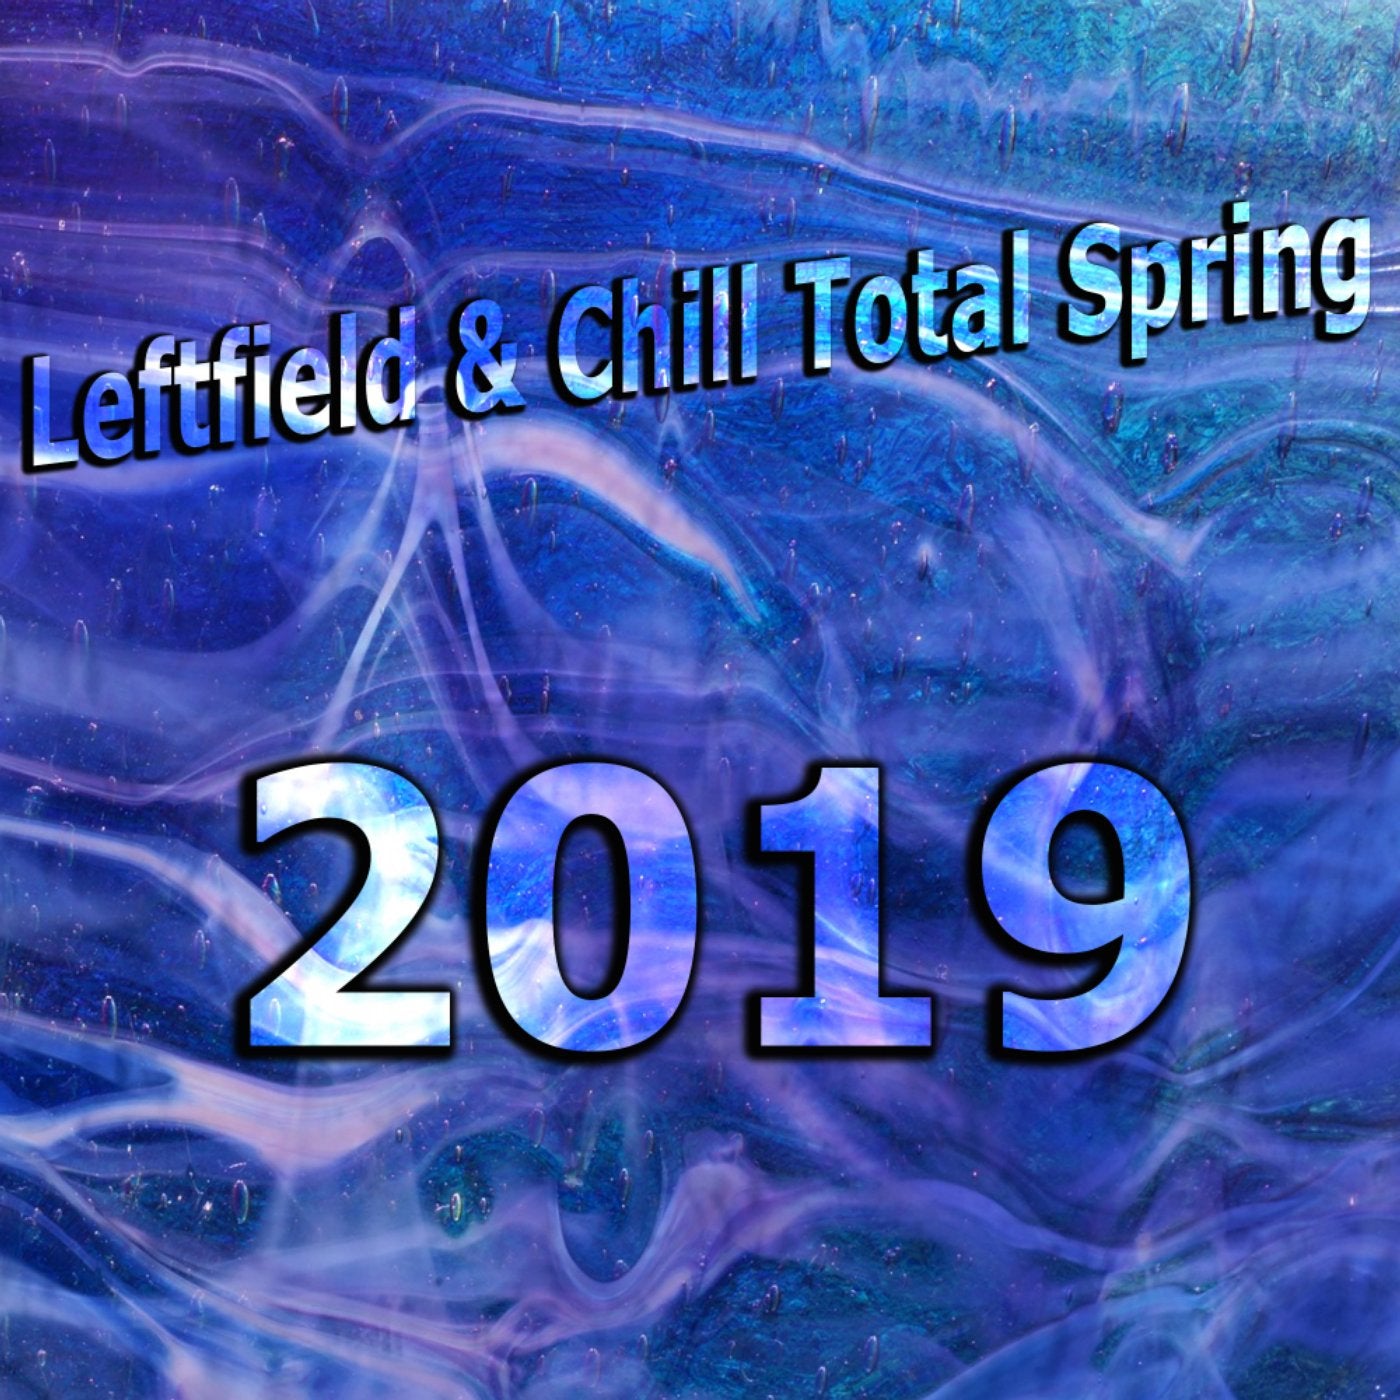 Leftfield & Chill Total Spring 2019